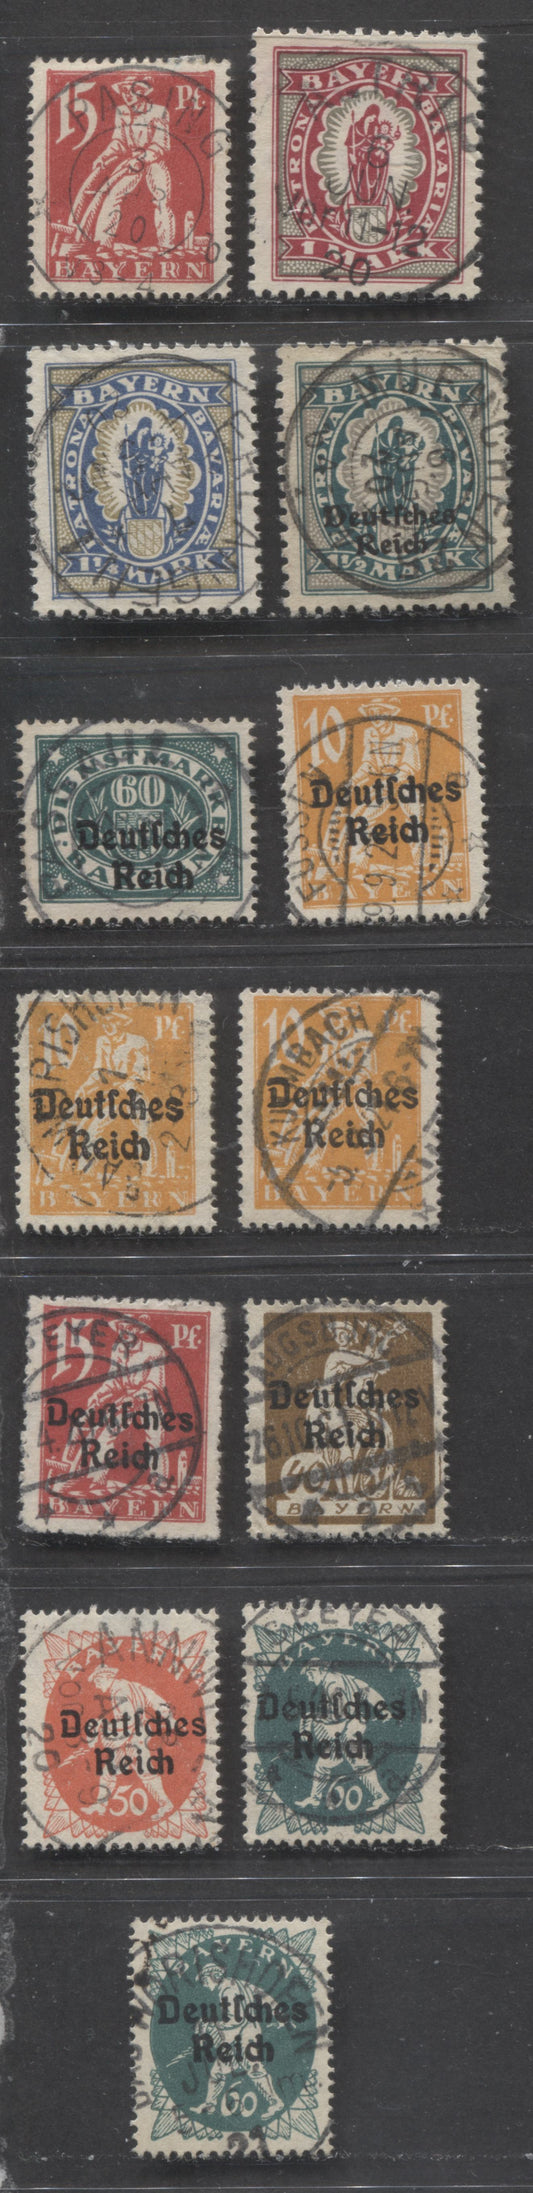 Lot 400 Germany - Bavaria SC#240/O59 1920 Plowman, Sower & Industry Definitives, All With SON Postal Cancels, 13 VF Used Singles, Click on Listing to See ALL Pictures, 2022 Scott Classic Cat. $25.5